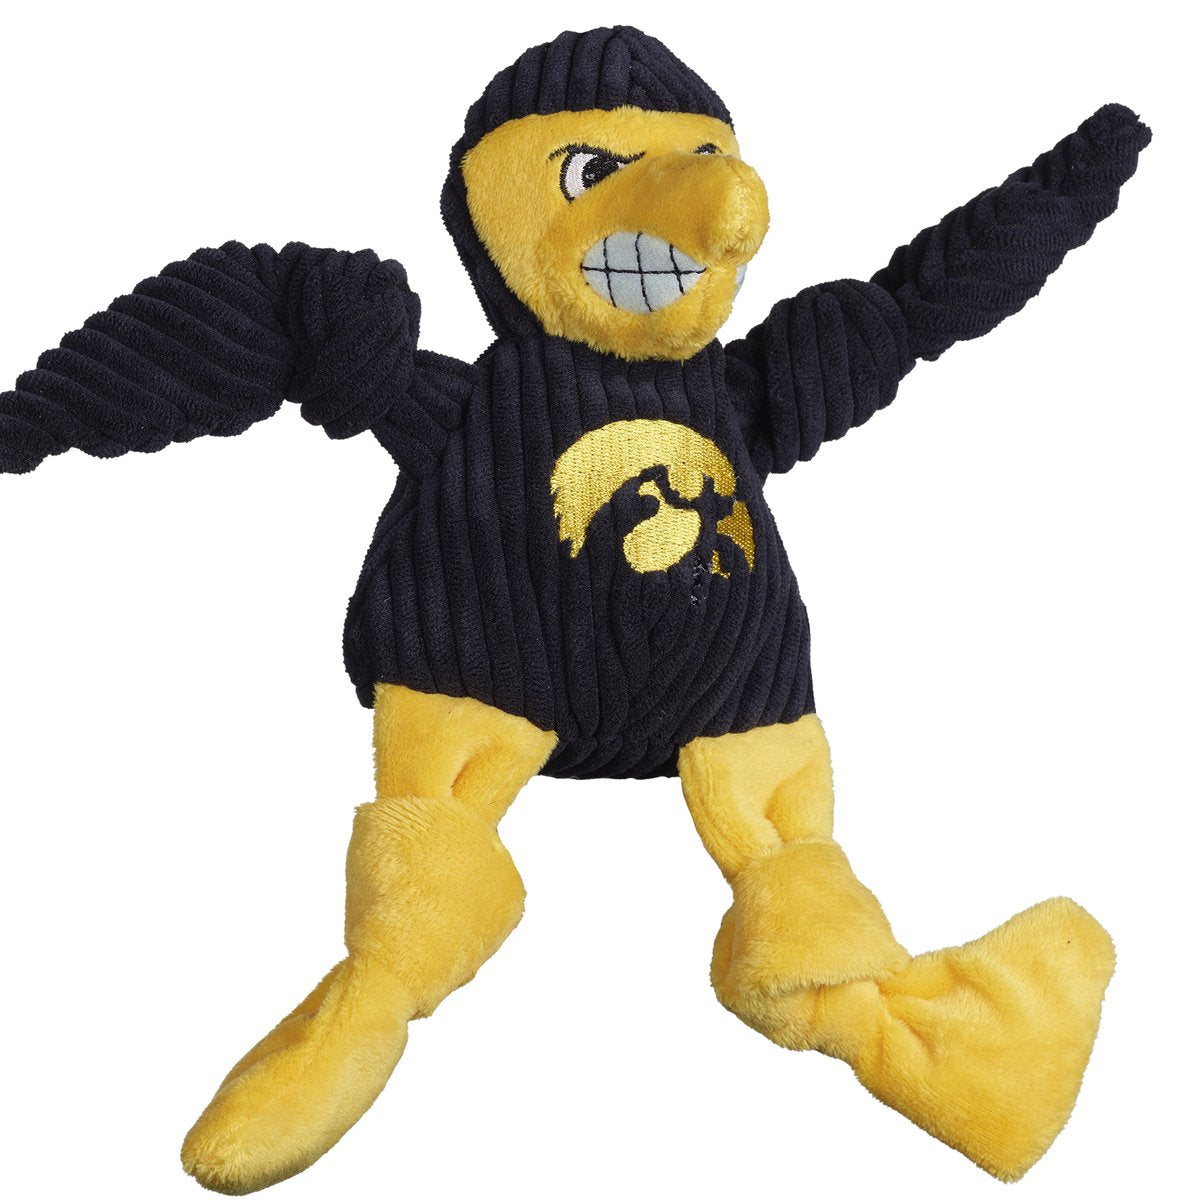 HuggleHounds Knottie Officially Licensed College Mascot Durable Squeaky Plush Dog Toy, Iowa Hawkeyes